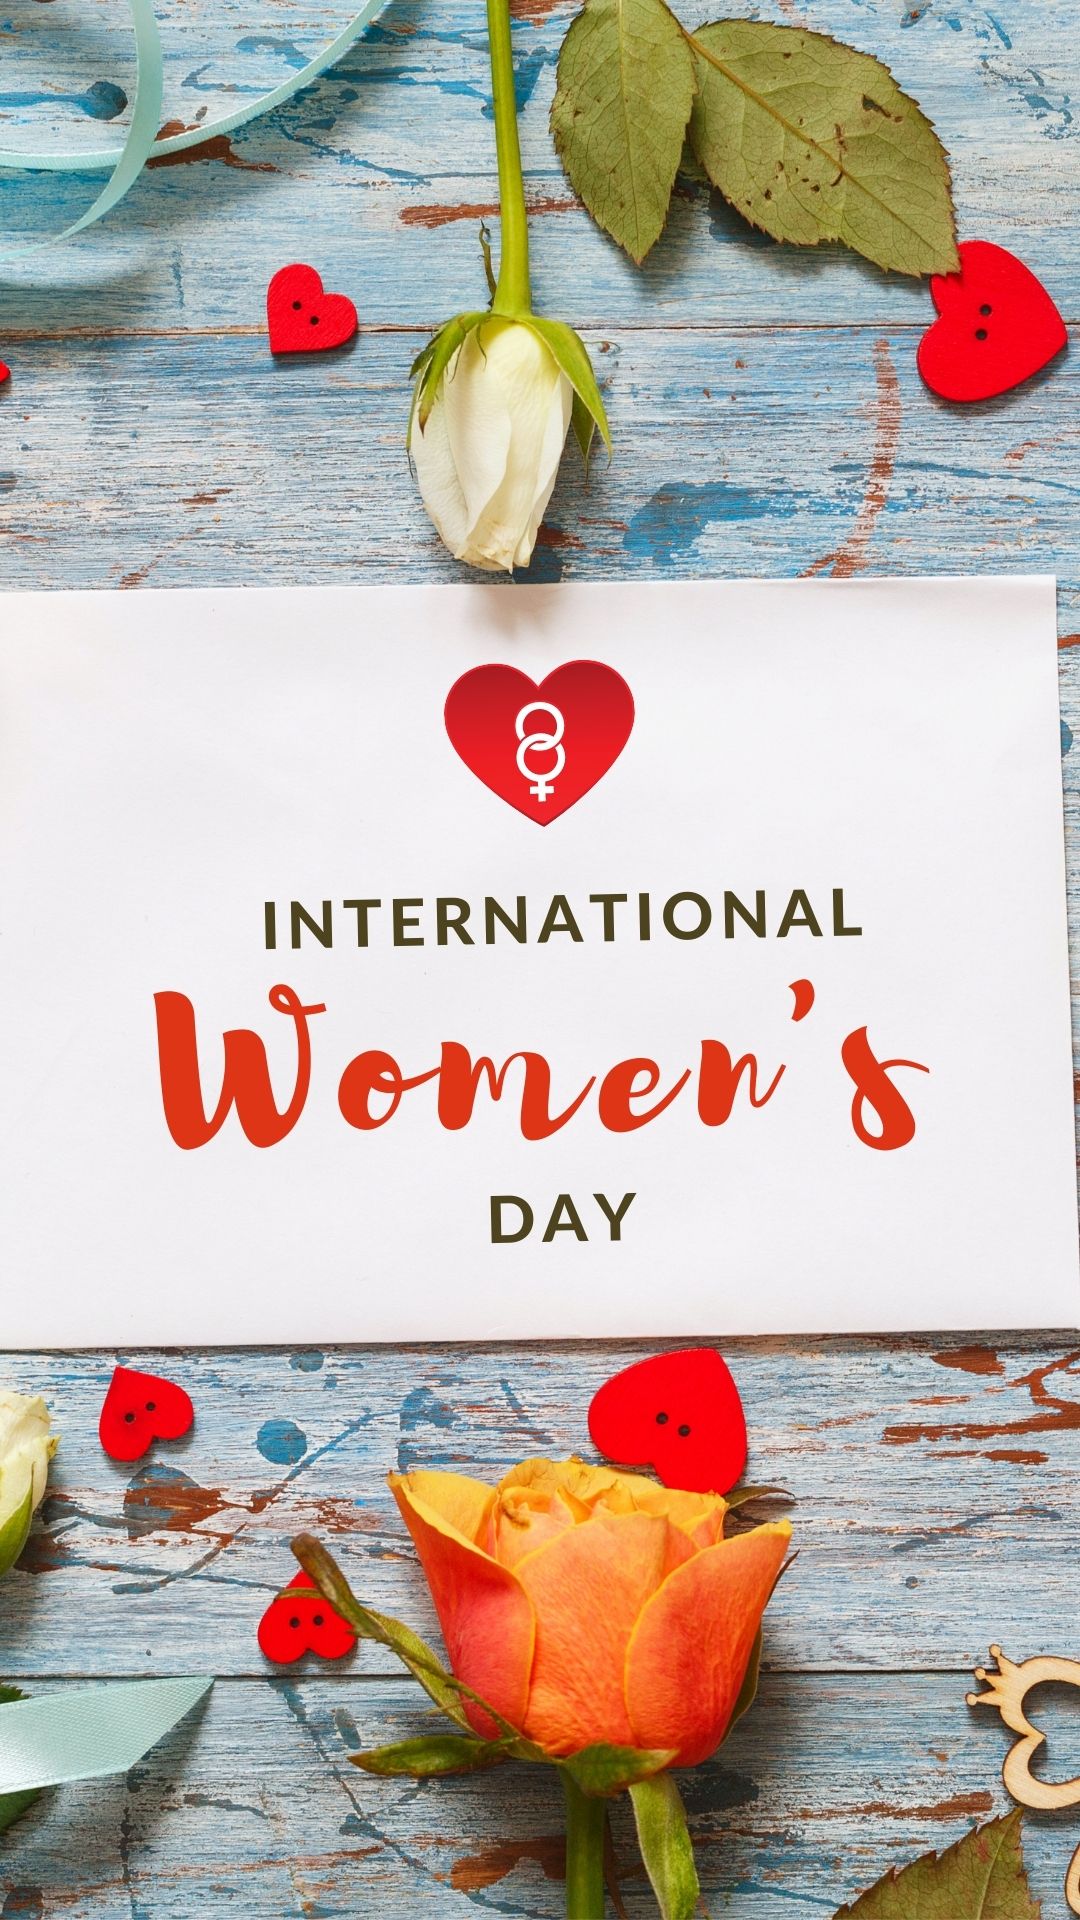 Happy International Women's Day 2022: Wishes, Image, Status, Quotes, Messages and WhatsApp Greetings to Share